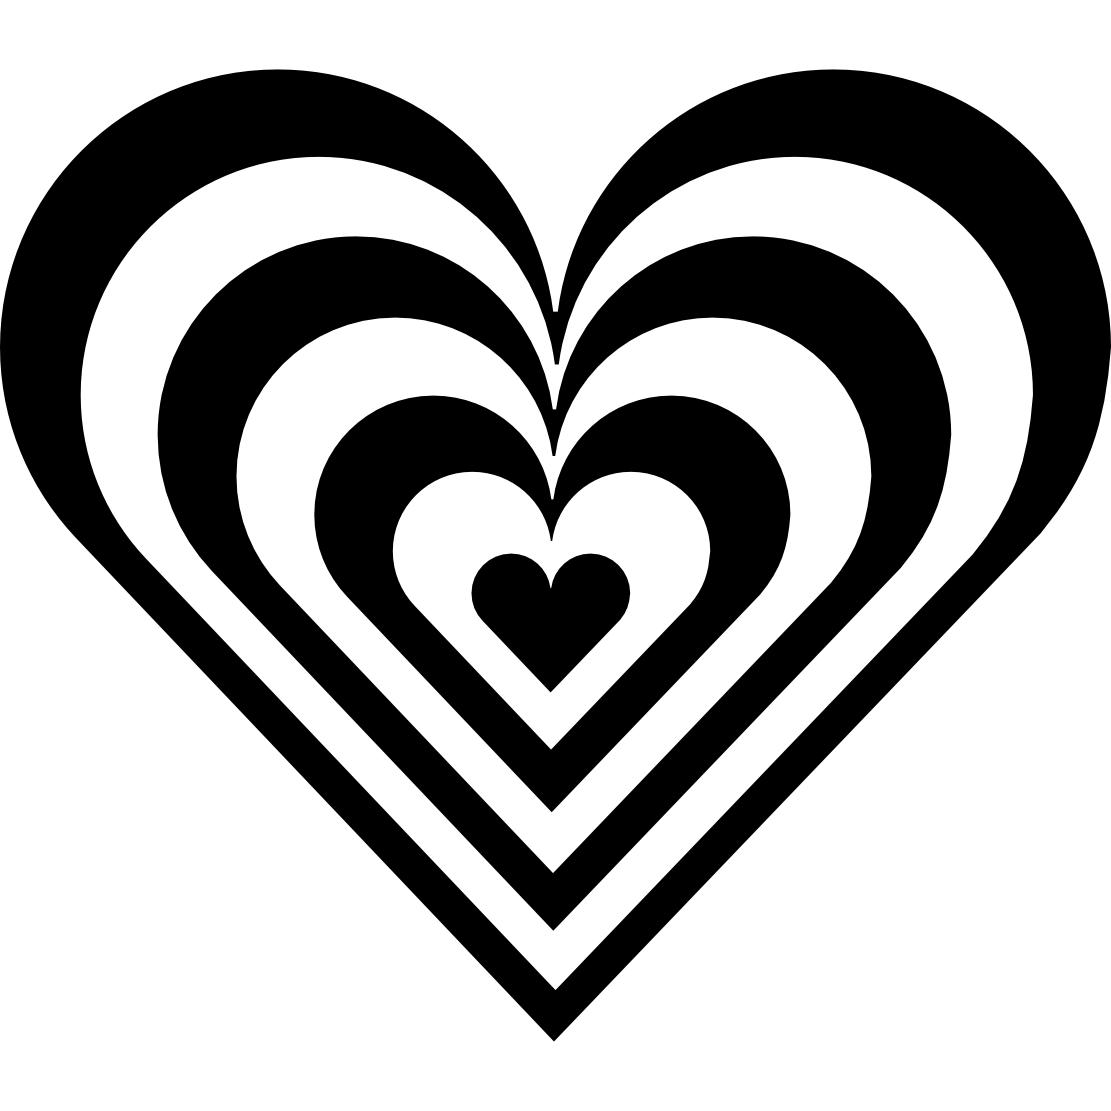 Heart Border Clipart Black And White | Clipart library - Free 